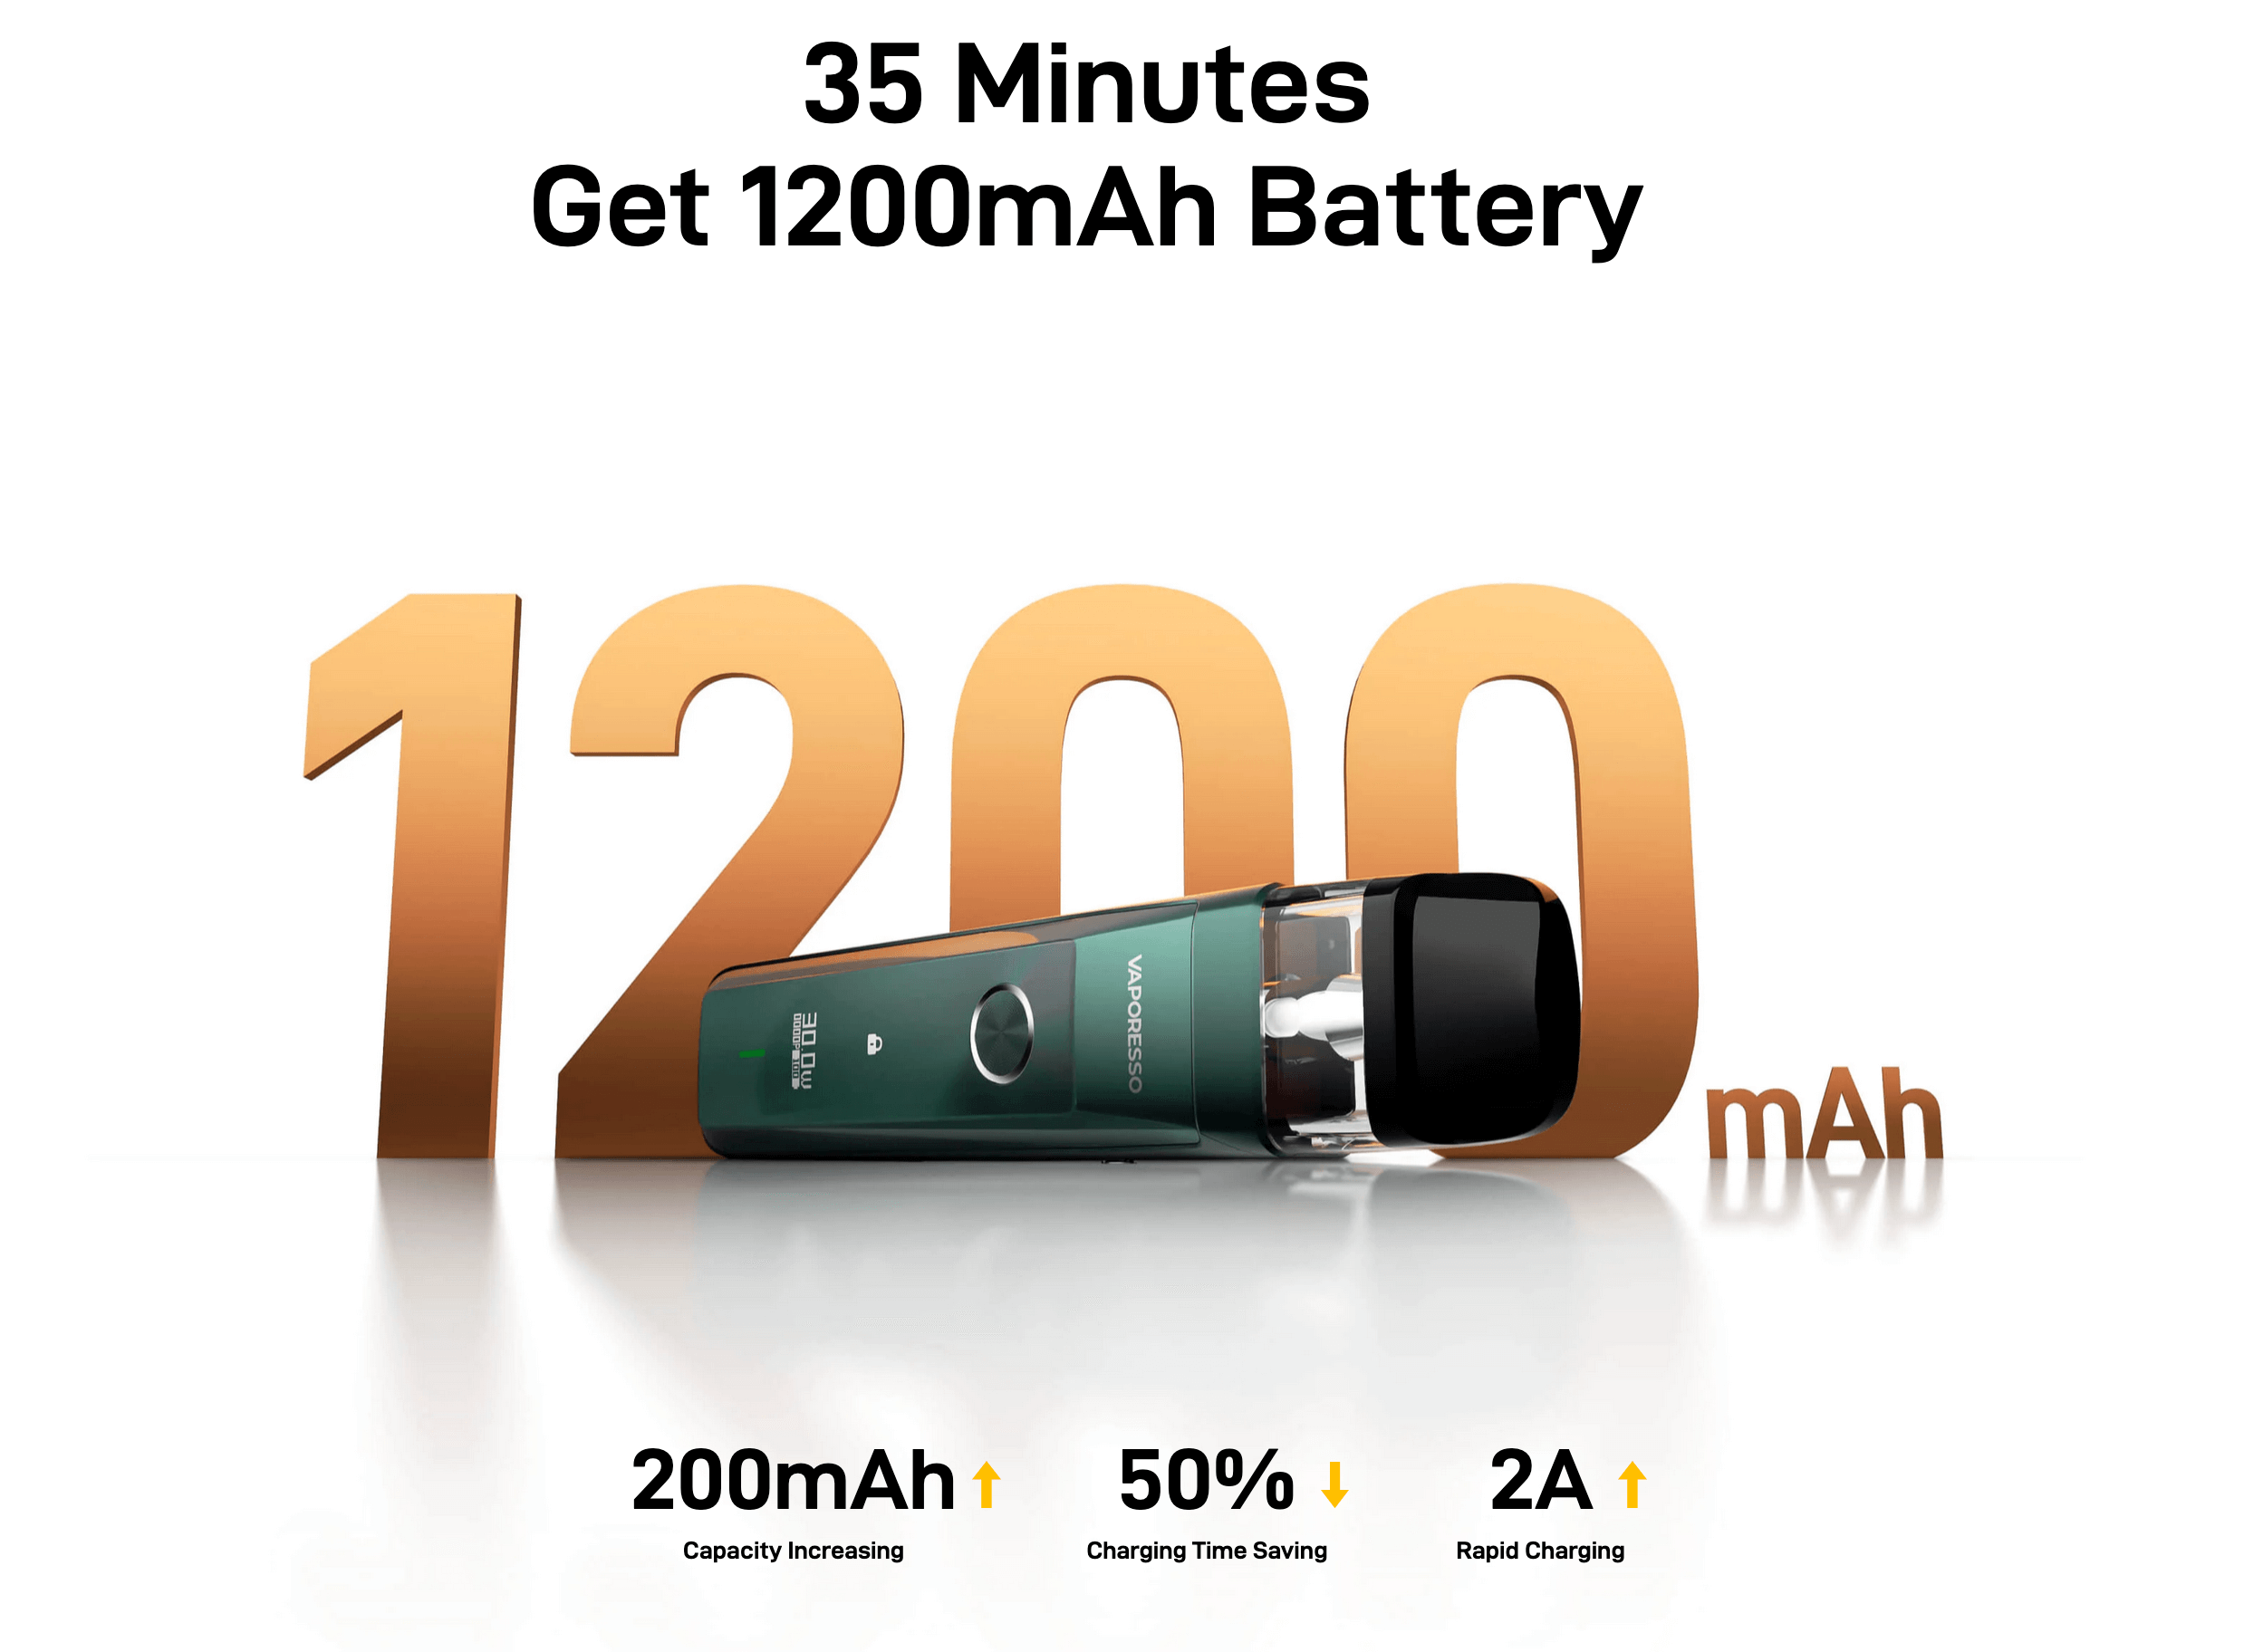 Vaporesso Xros Pro - 1200mah battery with 35 minute charge time